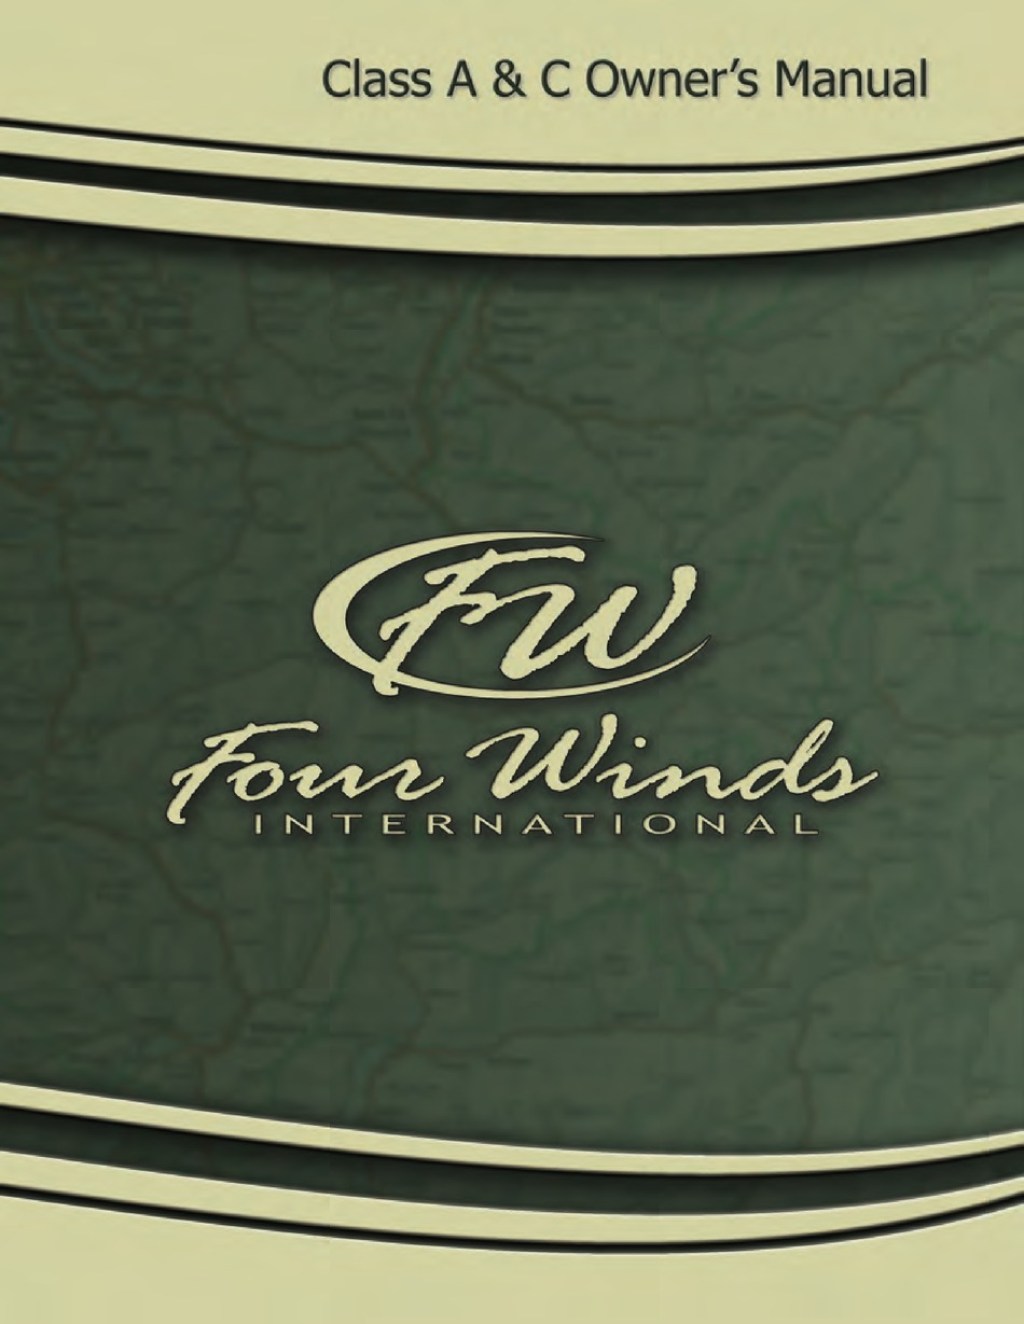 Picture of: FOUR WINDS INTERNATIONAL CLASS A OWNER’S MANUAL Pdf Download